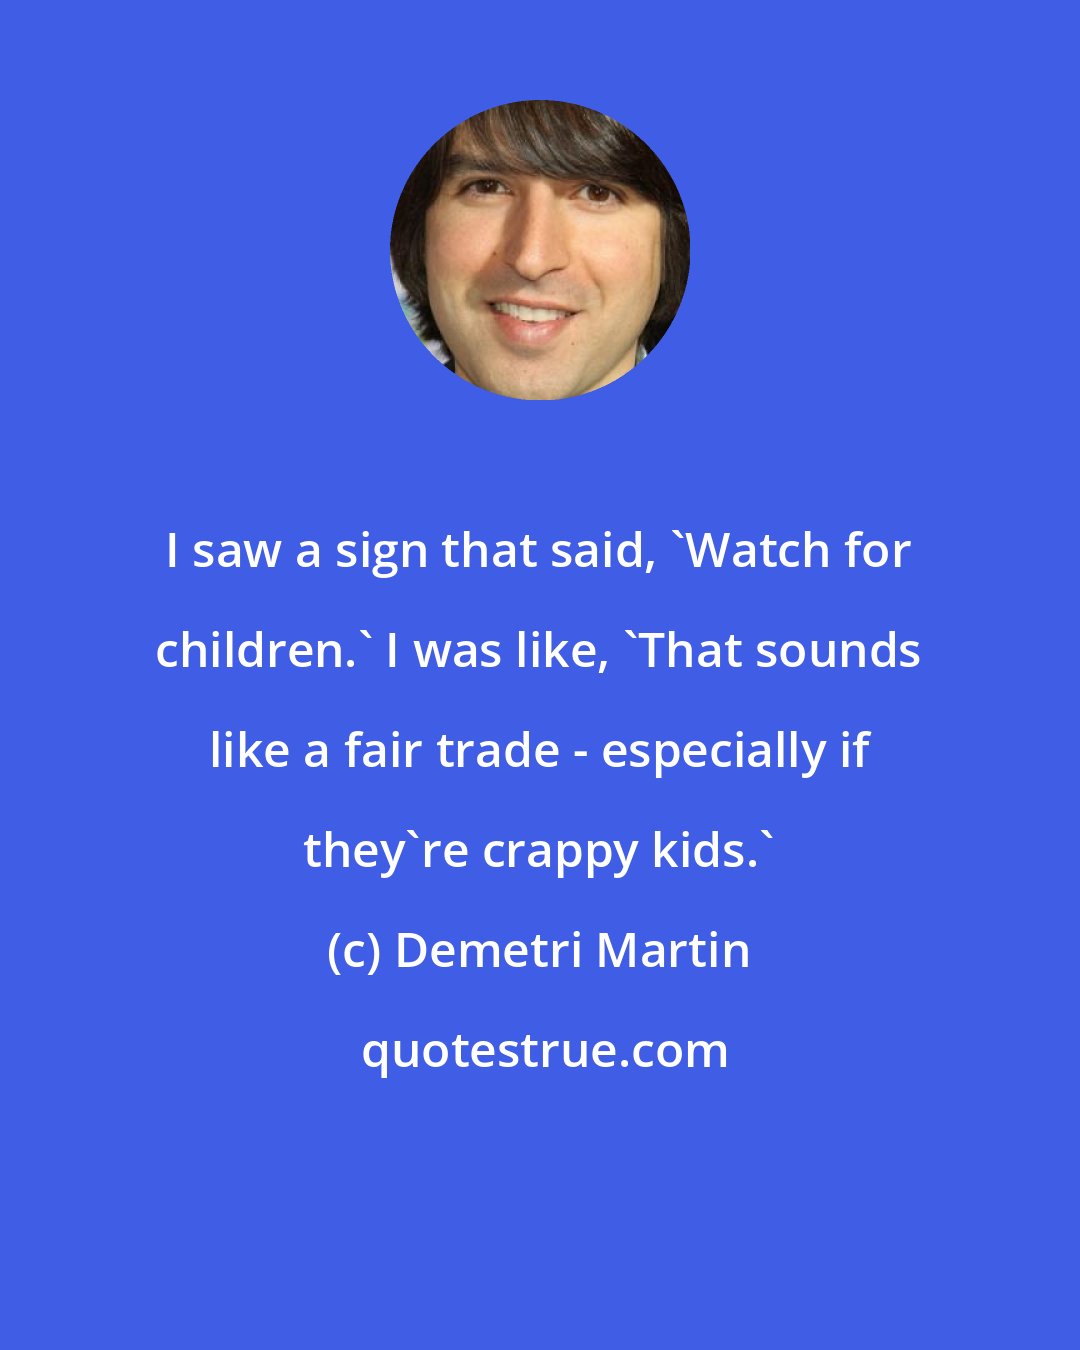 Demetri Martin: I saw a sign that said, 'Watch for children.' I was like, 'That sounds like a fair trade - especially if they're crappy kids.'